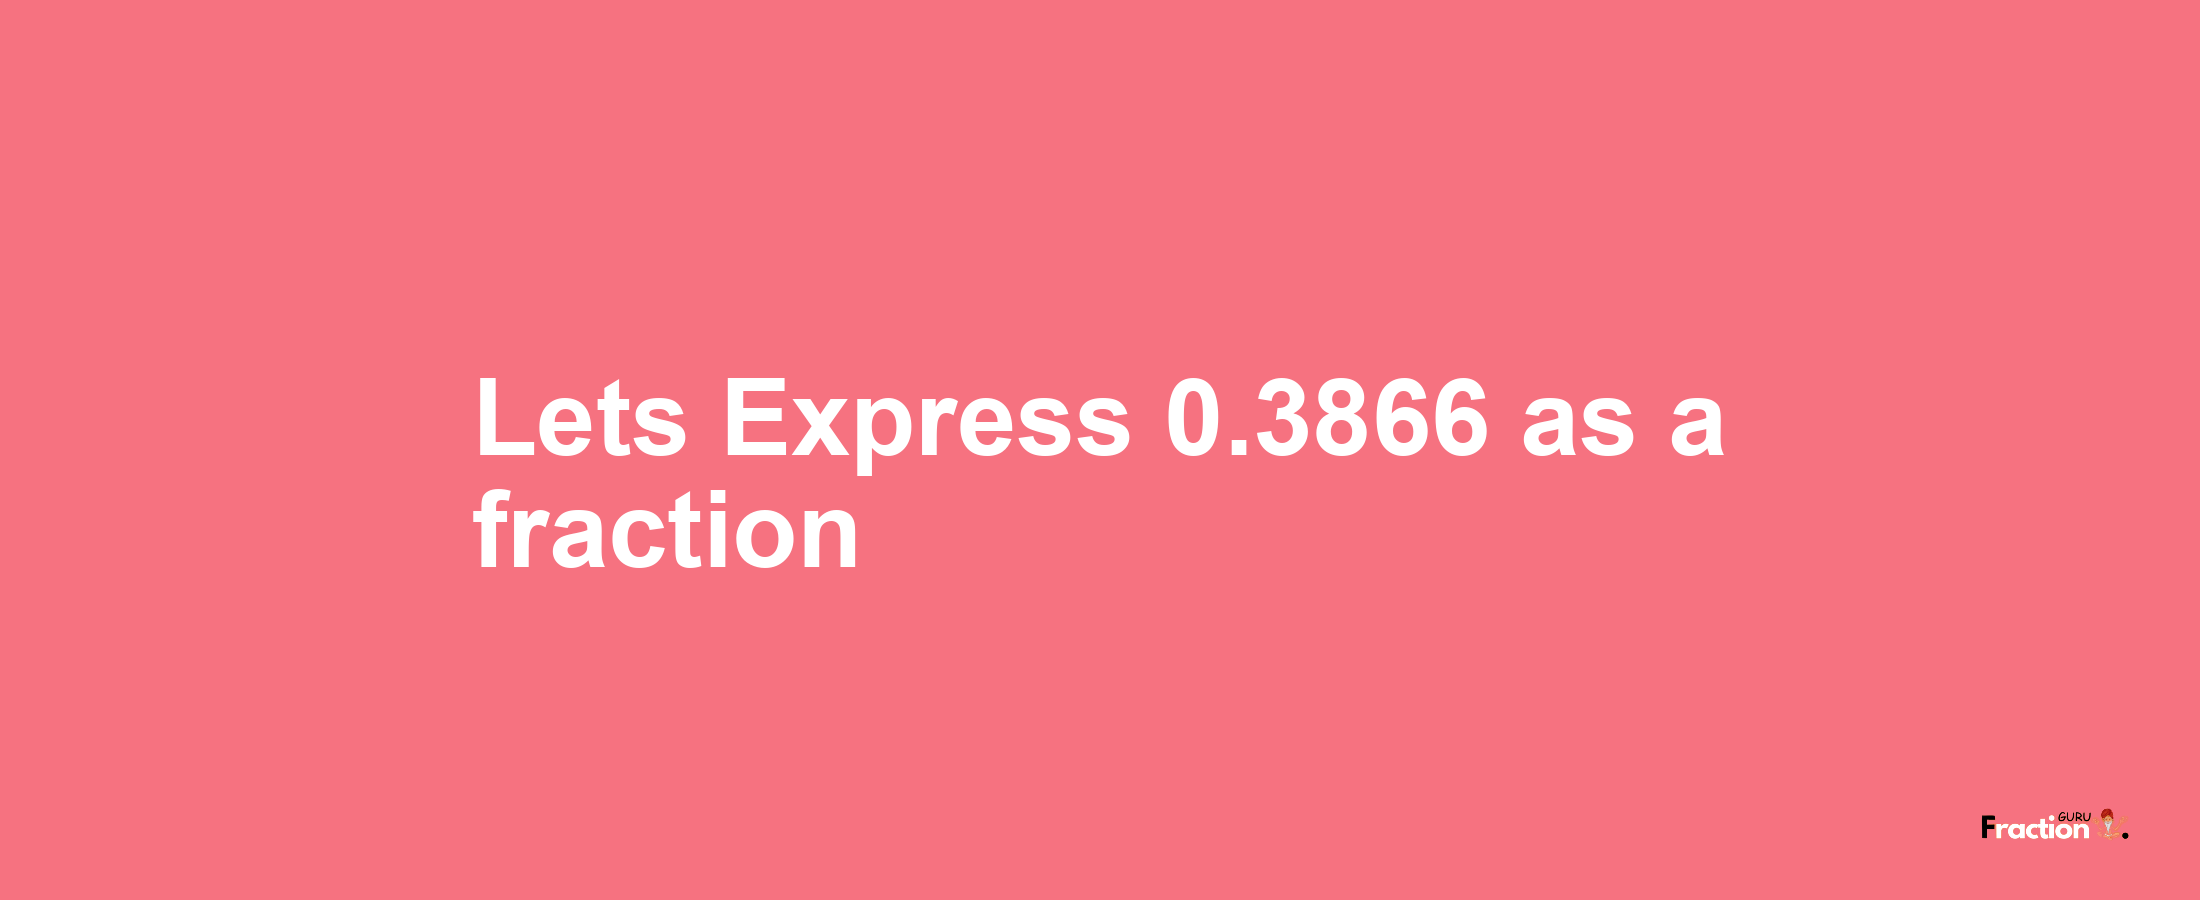 Lets Express 0.3866 as afraction